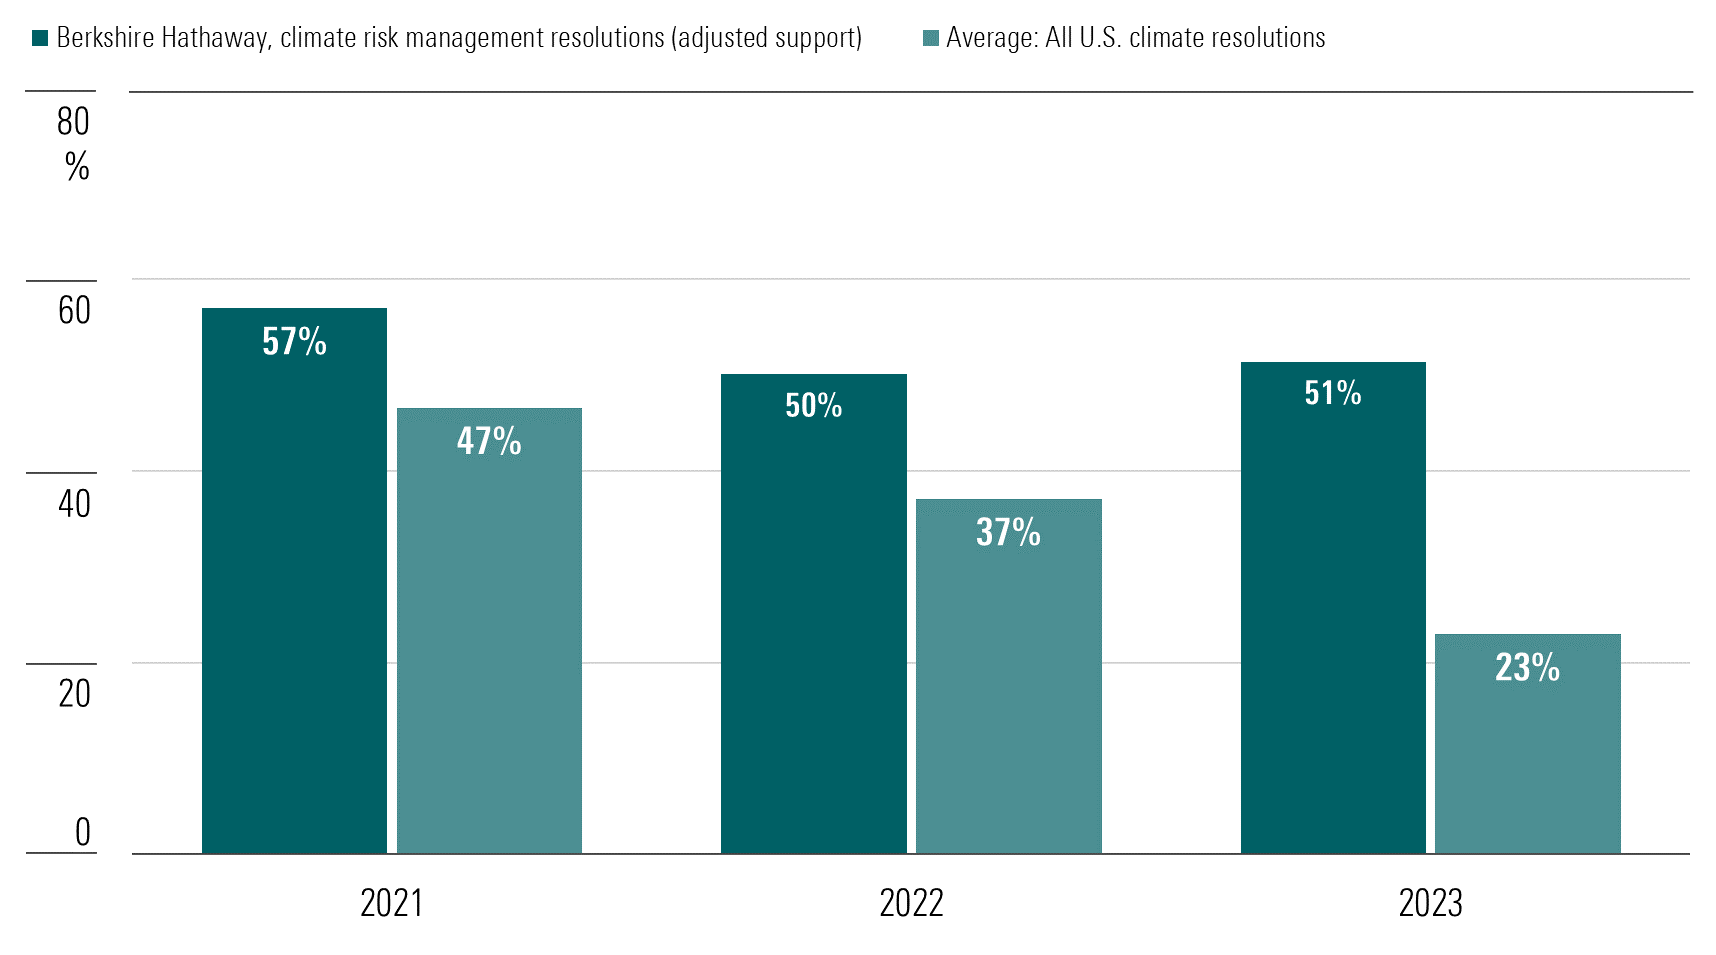 A bar chart showing the level of support for climate risk management shareholder resolutions at Berkshire Hathaway in the three proxy years to 2023, plotted against the average support for all U.S. climate resolutions.